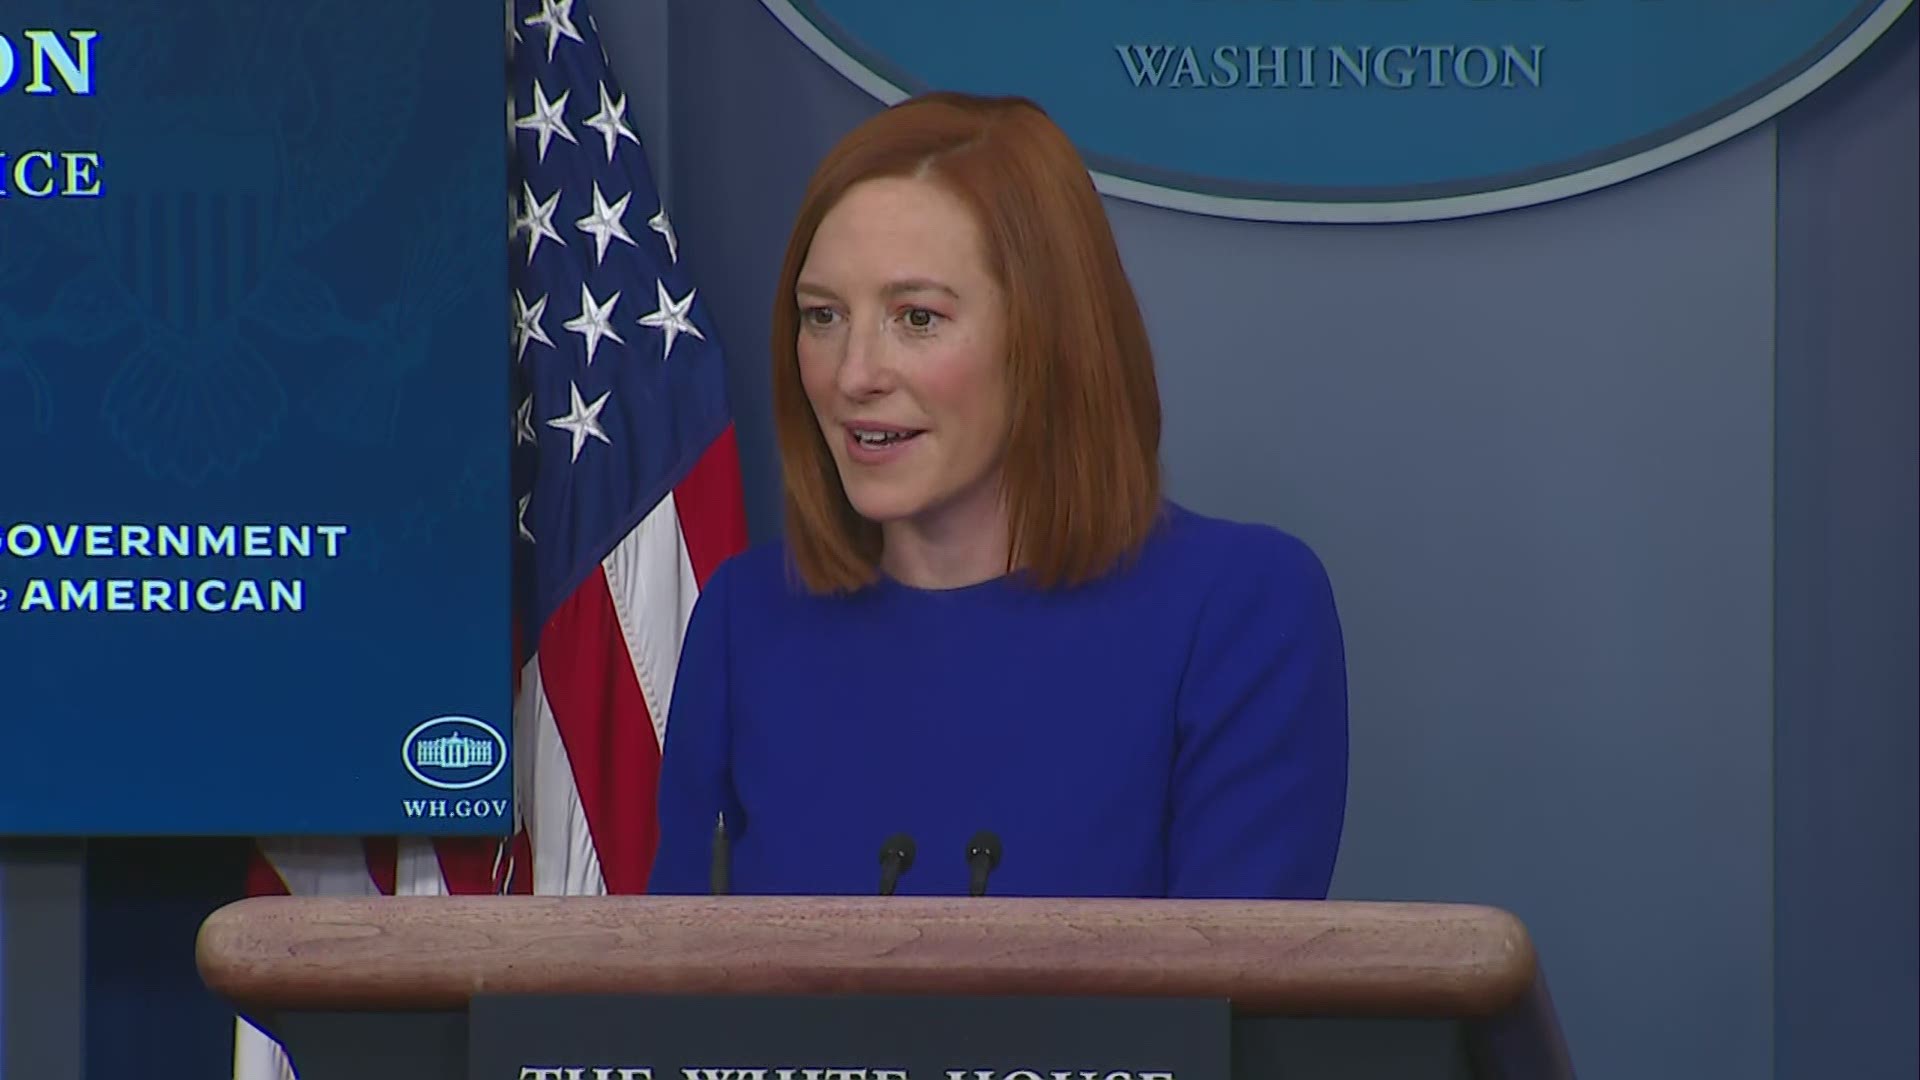 White House Press Secretary Jen Psaki described how President Biden said his White House arrival after inauguration "felt like he was coming home."